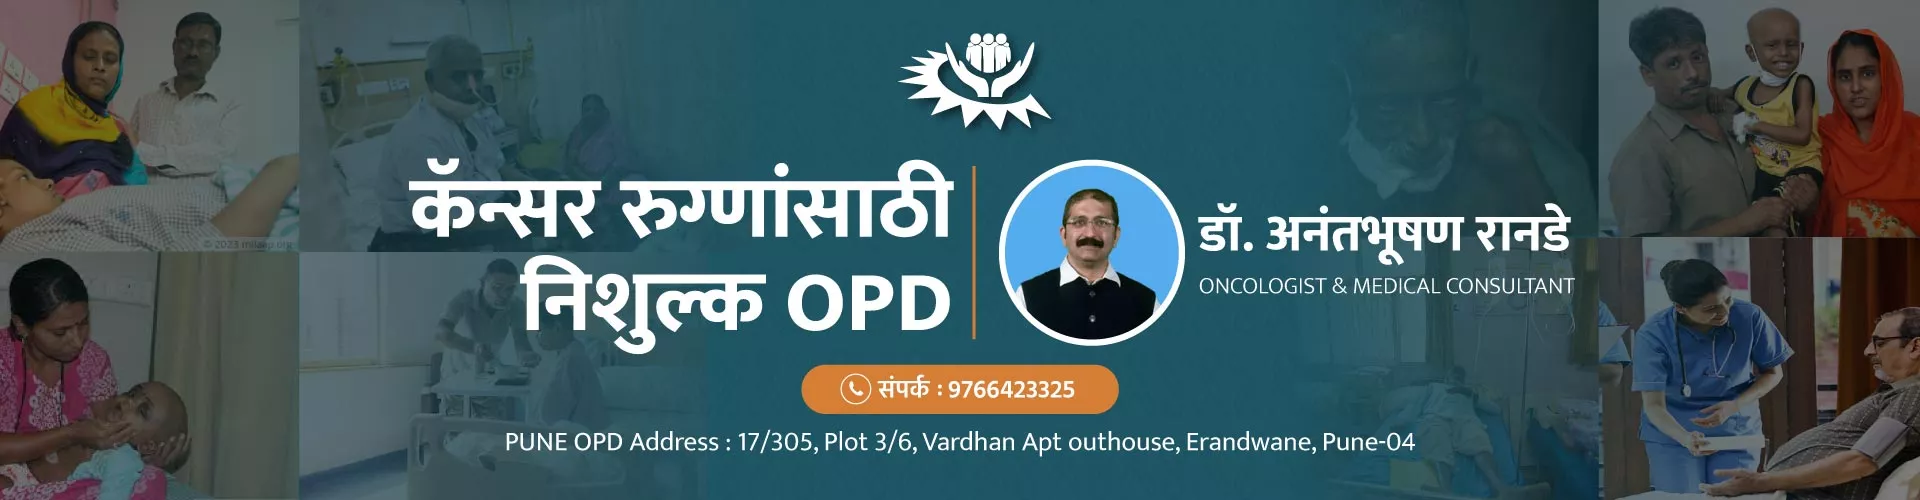 Free Cancer OPD in Pune - Dr. Anantbhushan Ranade